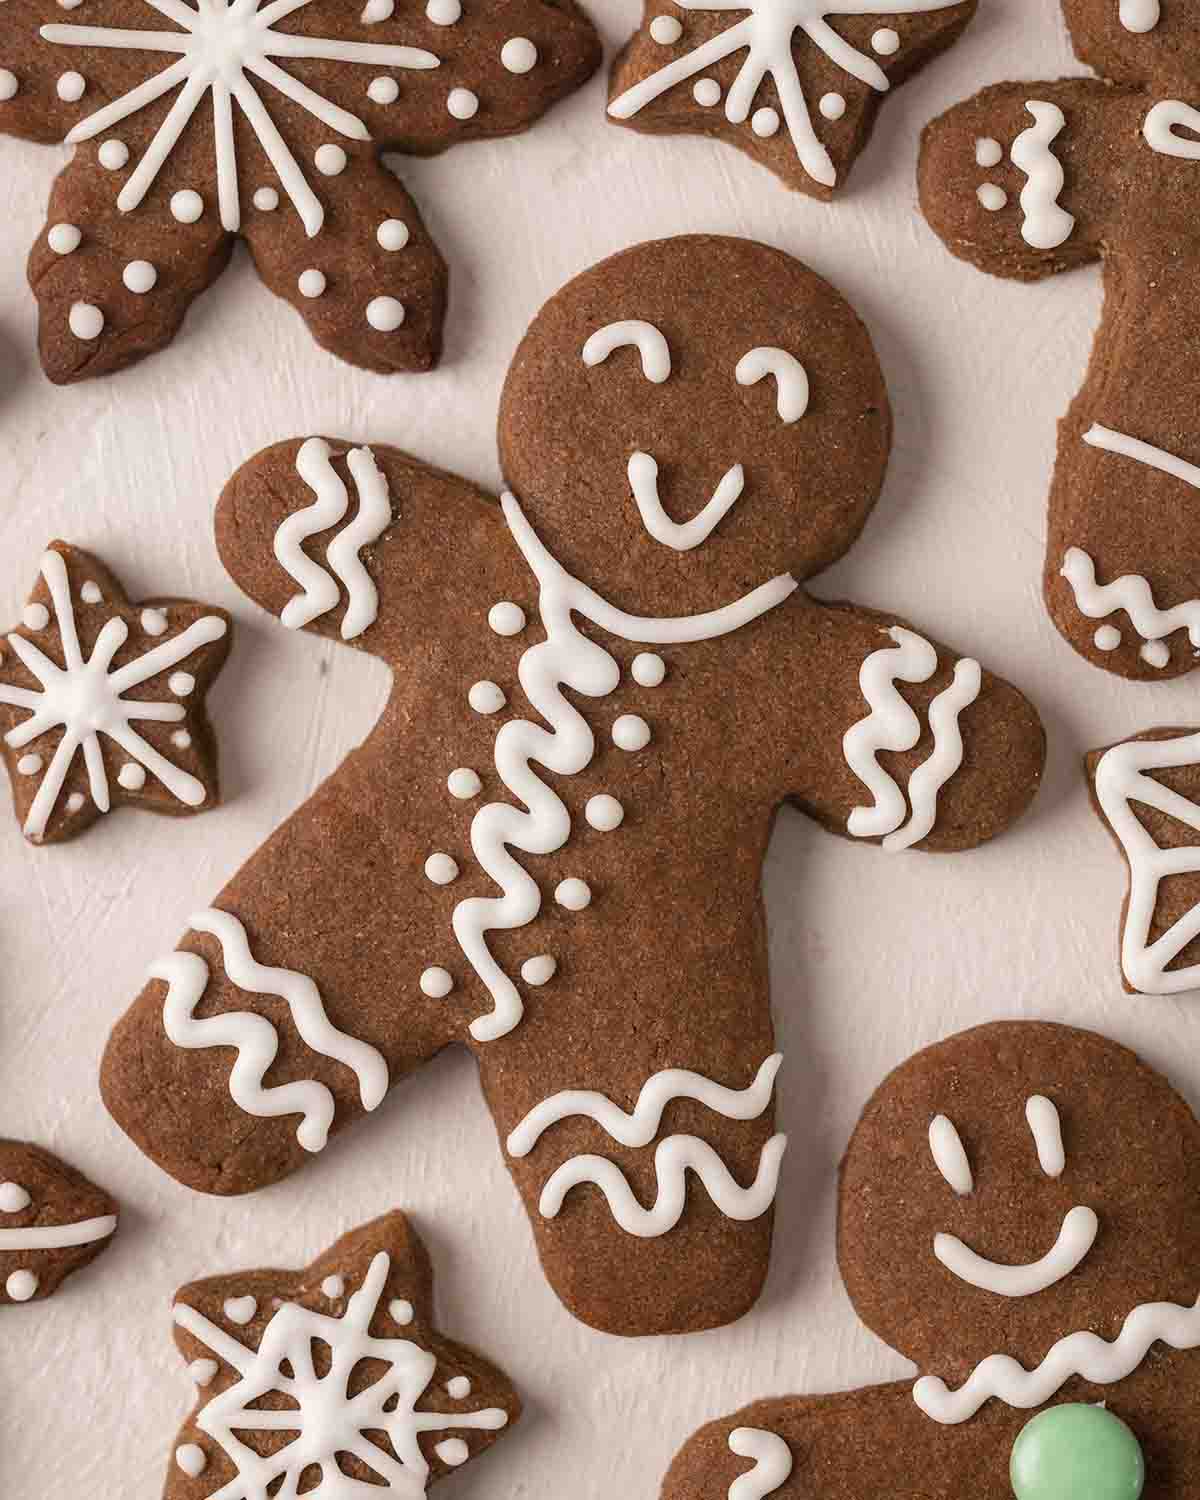 Close up of one gingerbread person, decorated with swirls and smiley face.